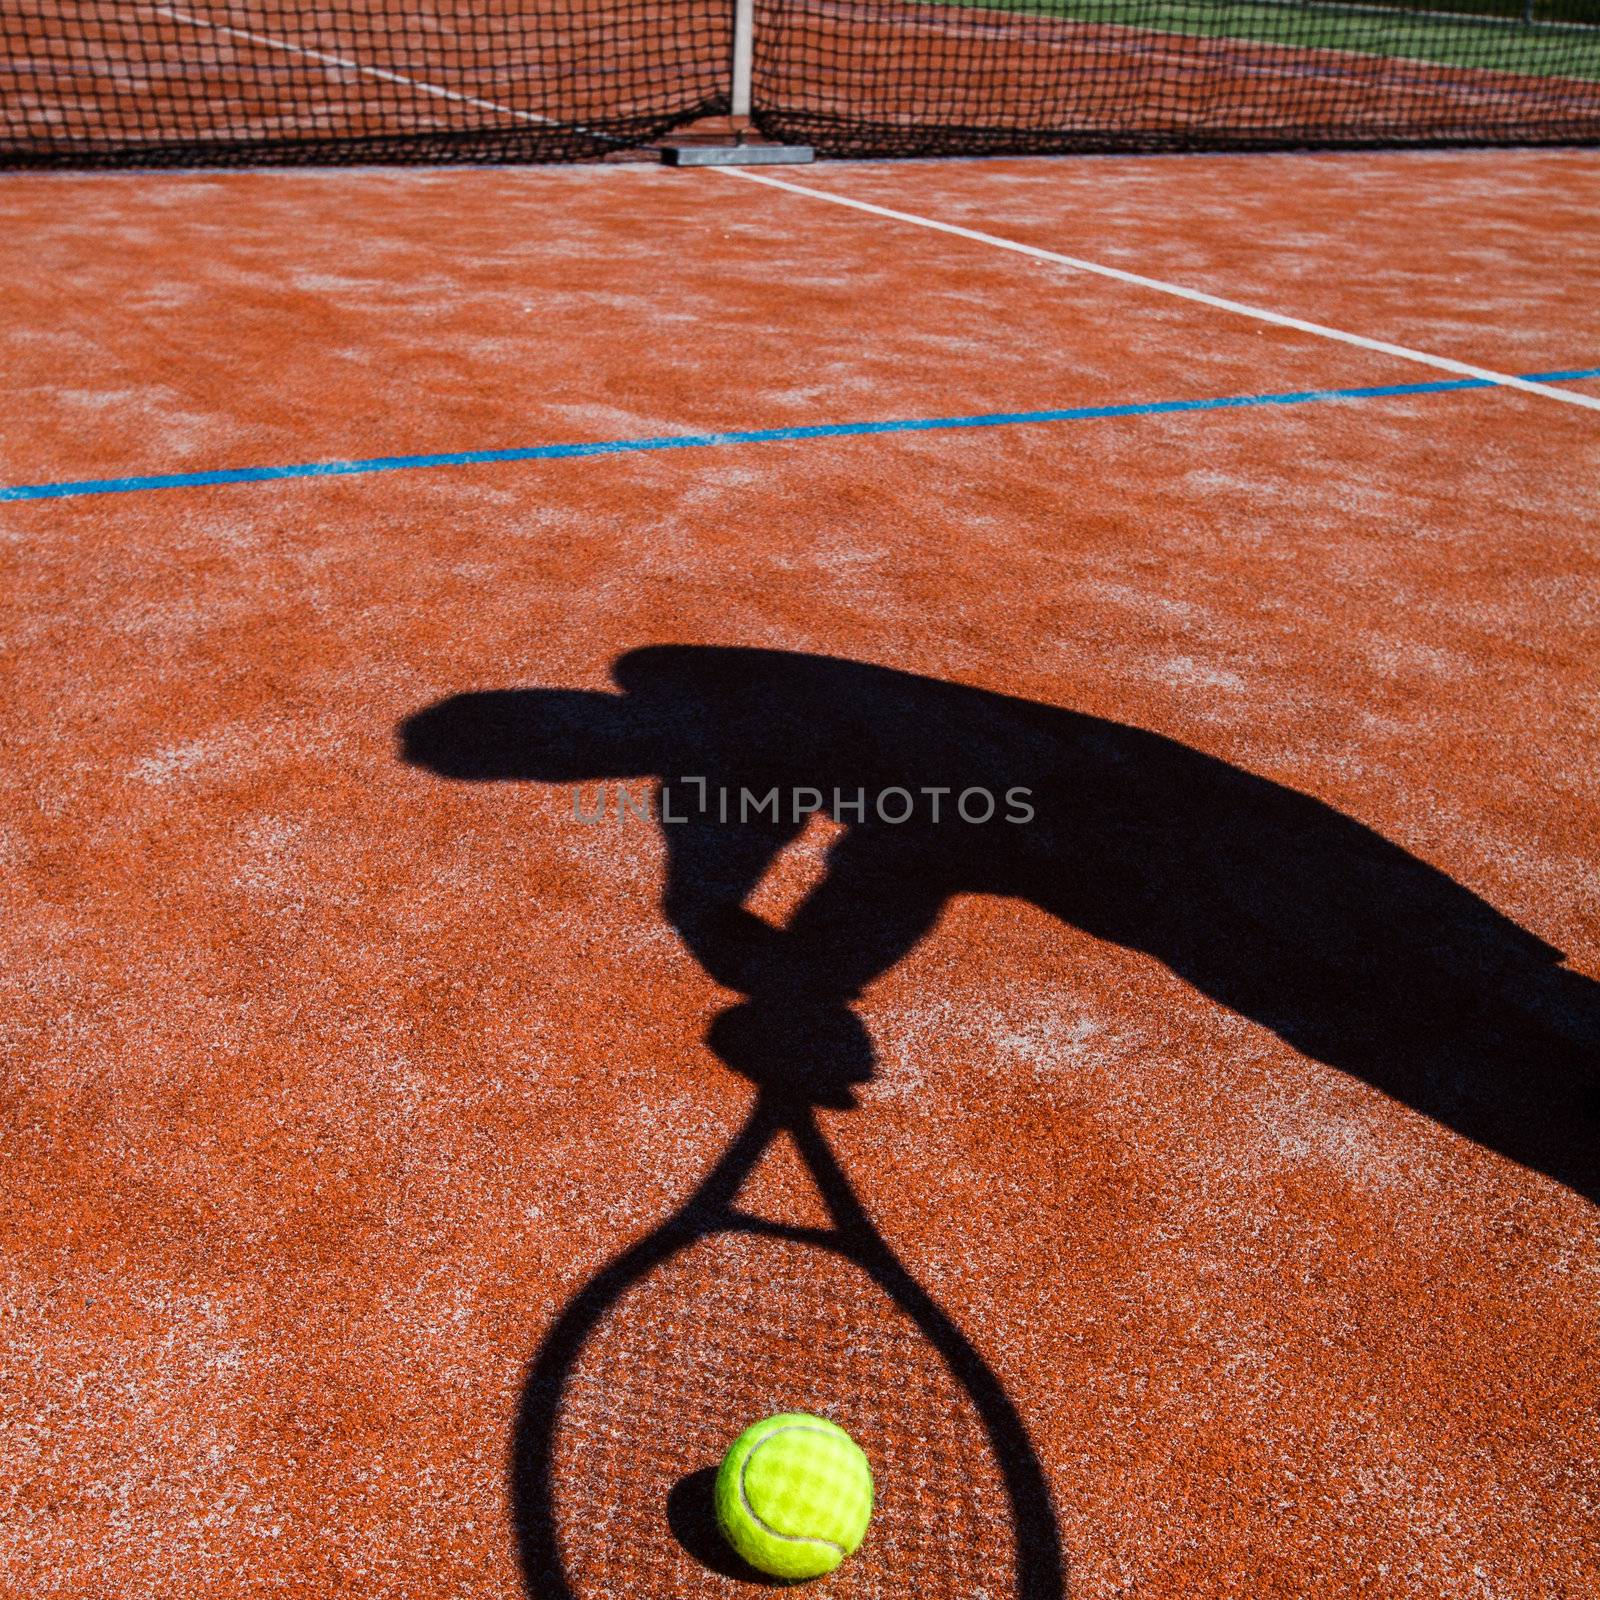 shadow of a tennis player in action on a tennis court by viktor_cap